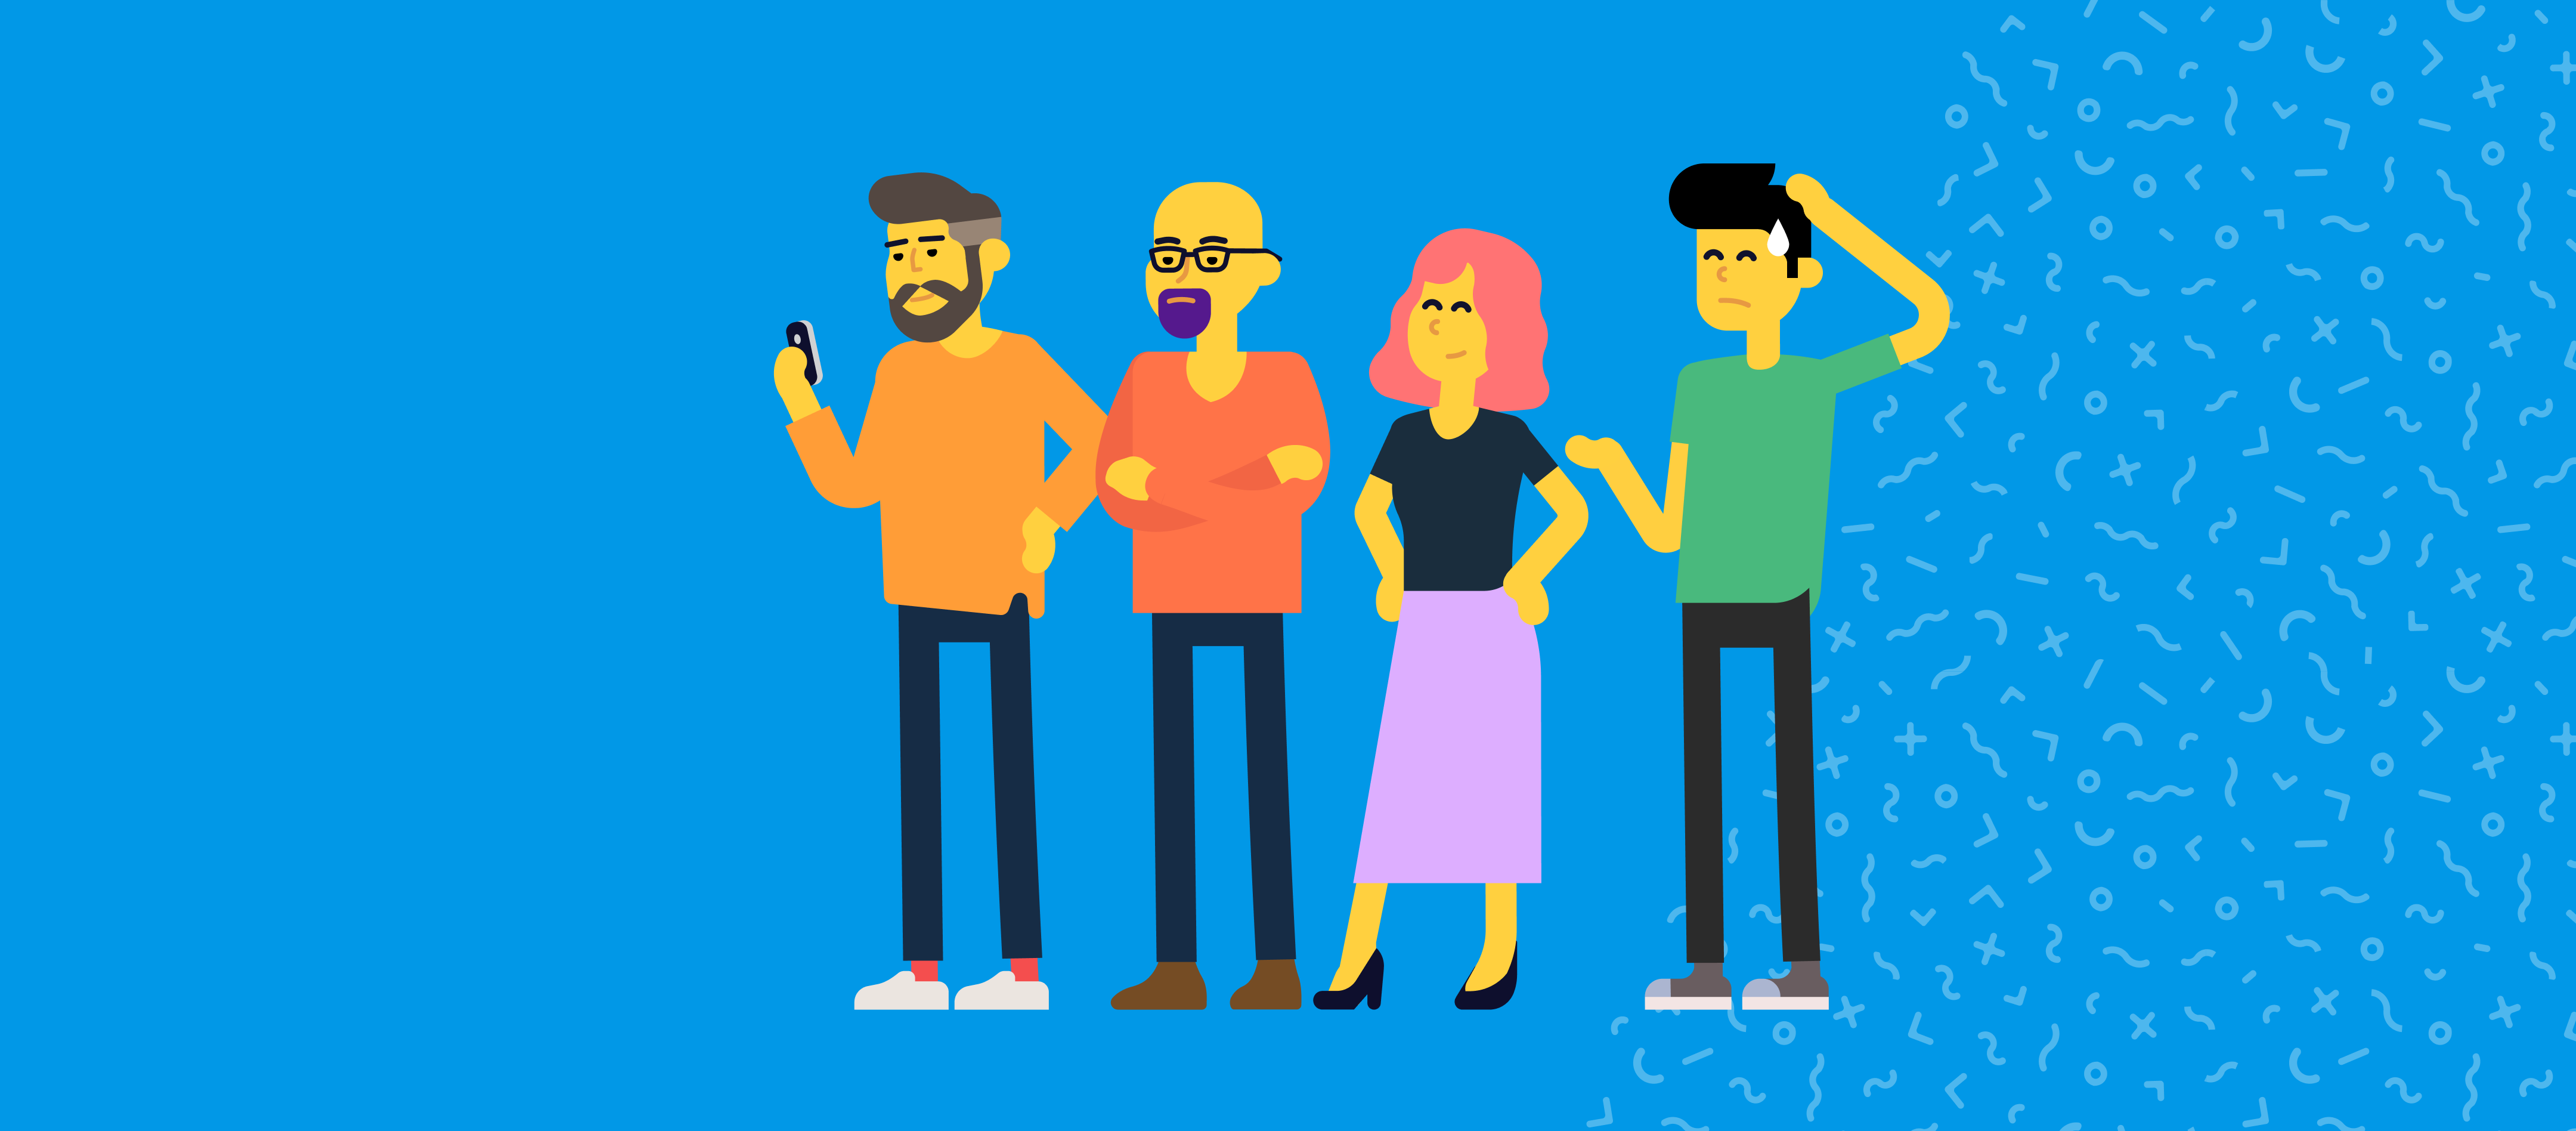 Blue background with 4 yellow illustrated people